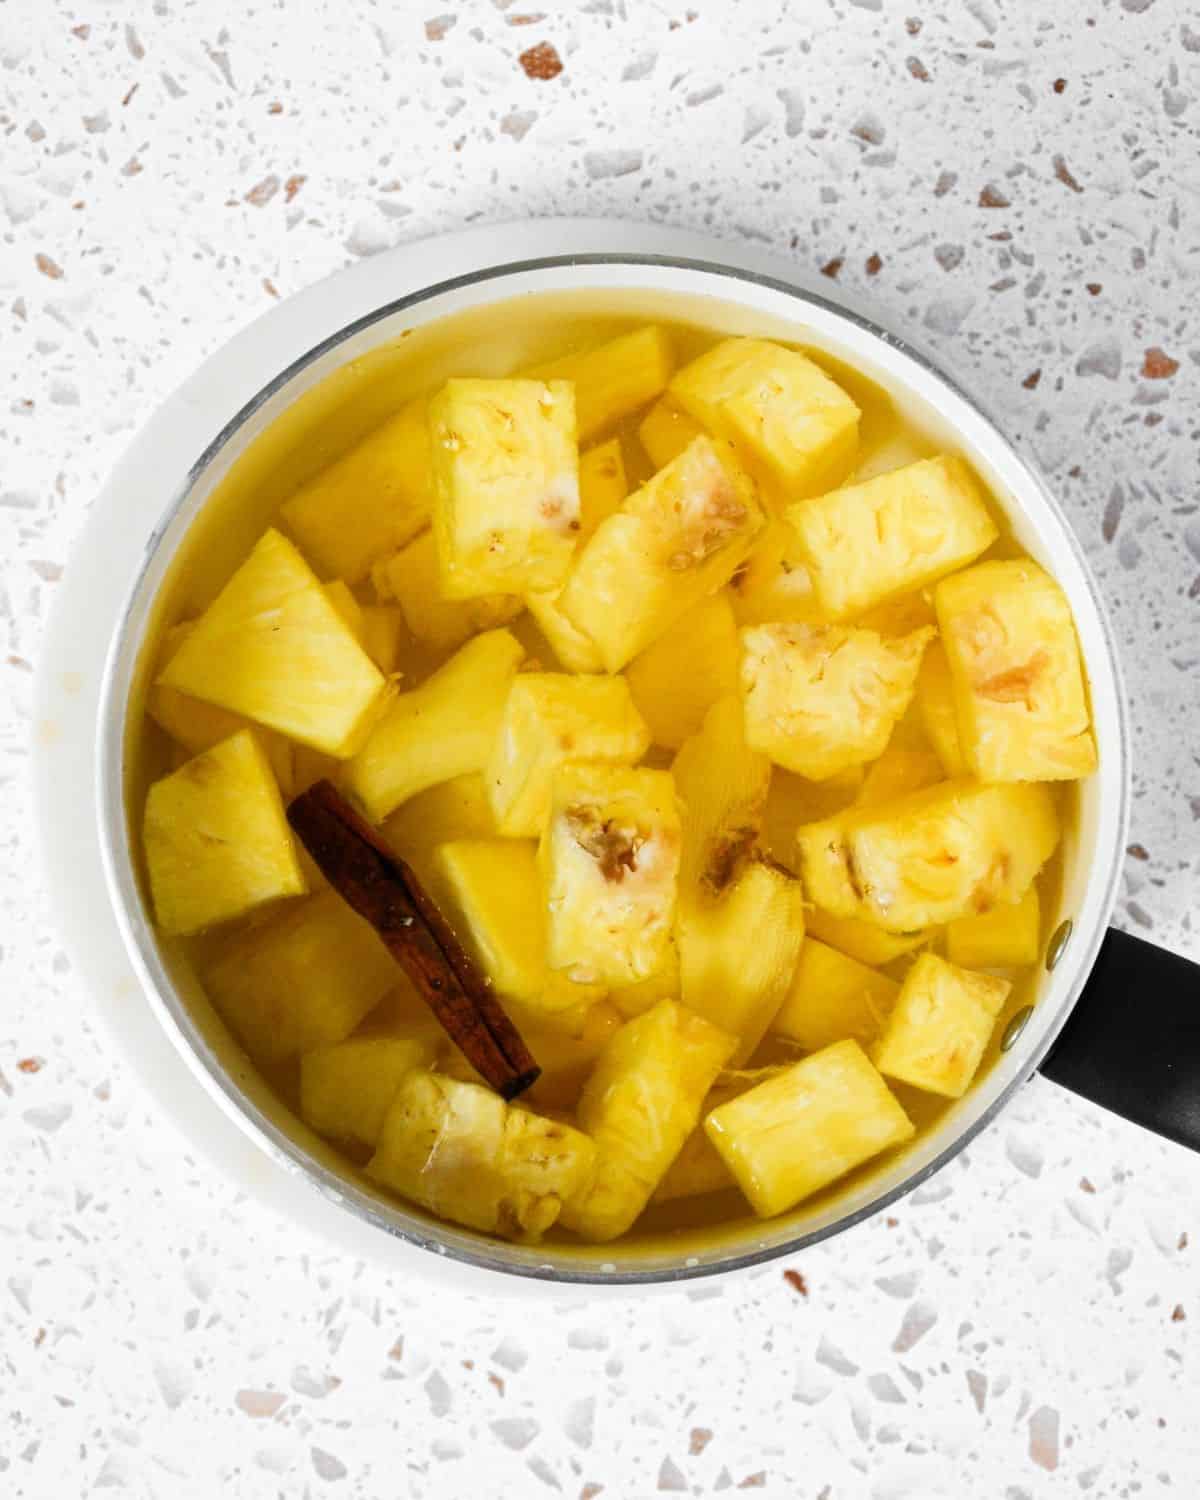 Pineapple and cinnamon sticks in a pot.